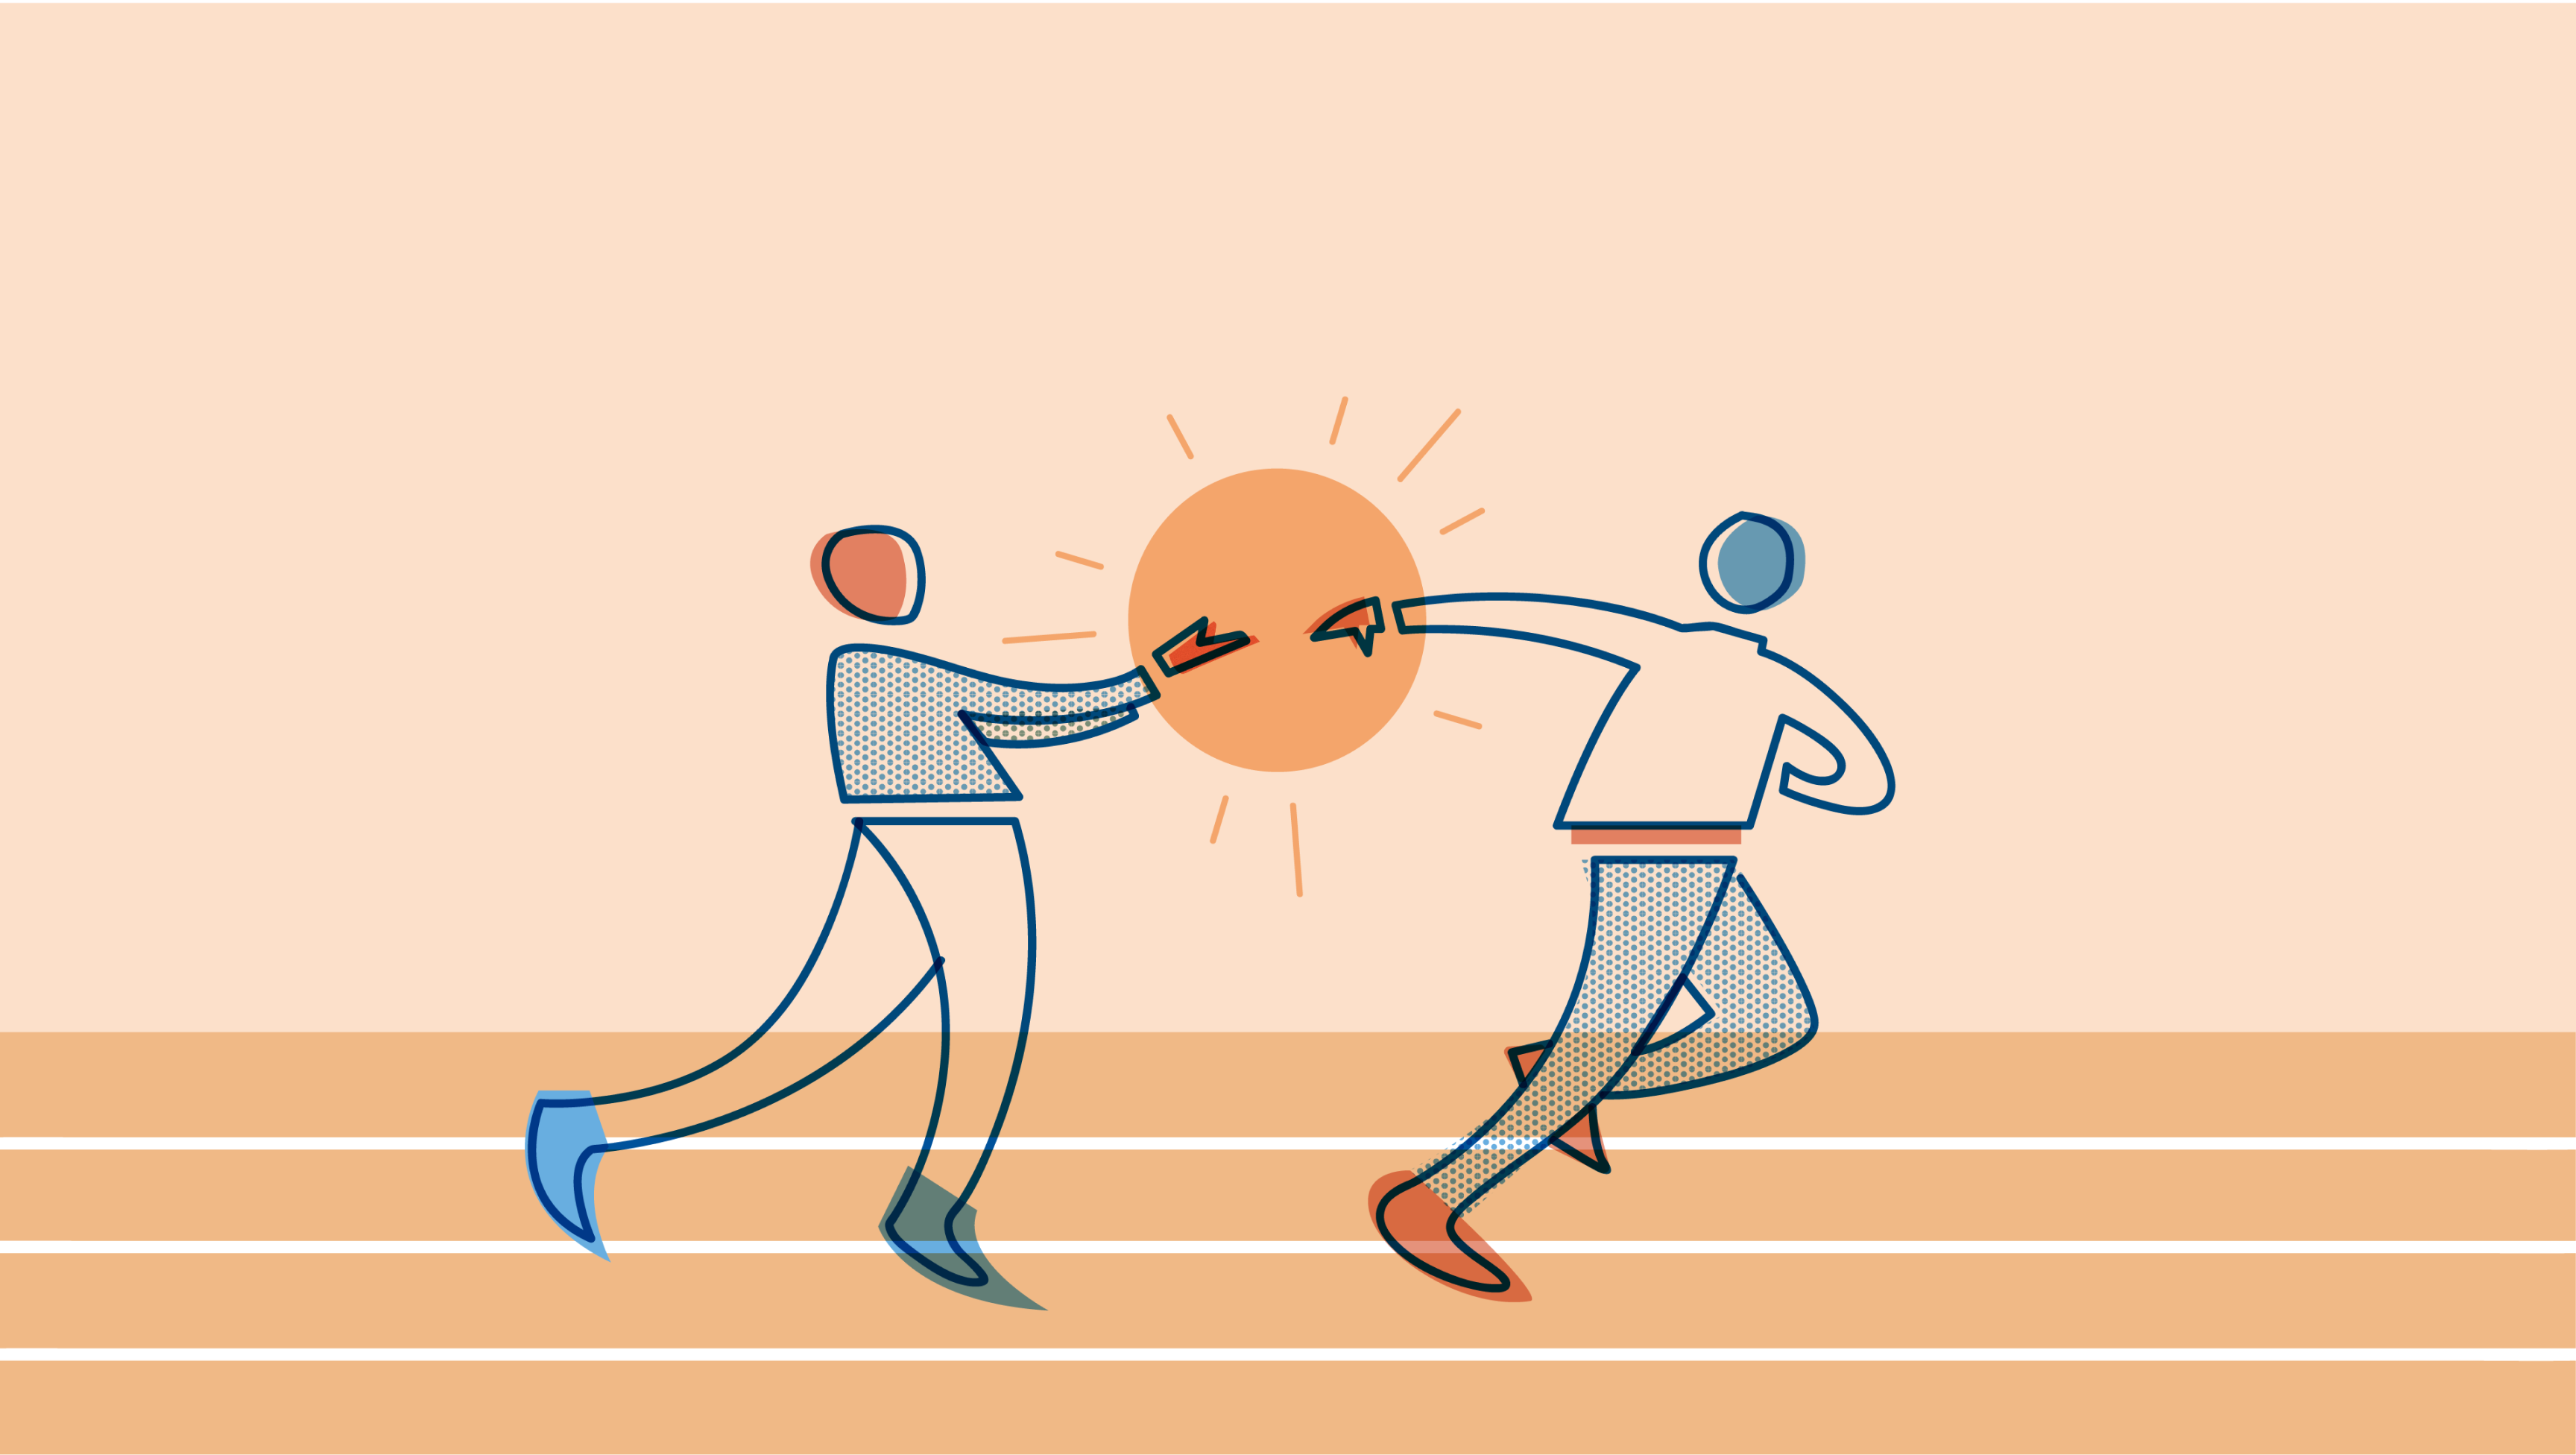 Two people running on a track, passing an invisible baton. Illustration.